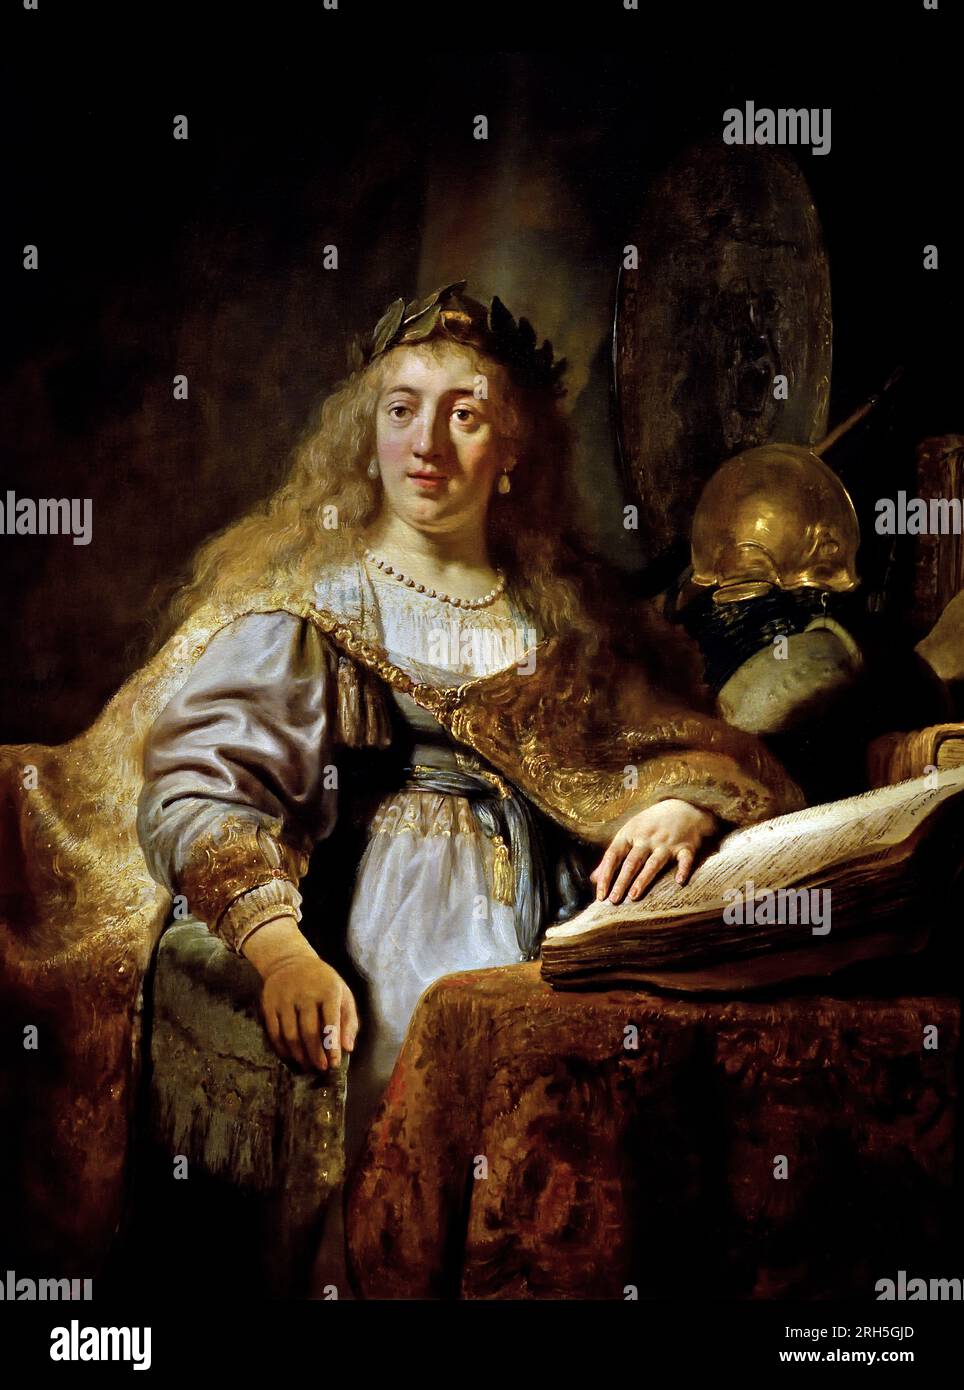 Minerva in Her Study, 1635 by Rembrandt Harmensz (Harmenszoon) van Rijn  1606–1669 17th Century The Netherlands Dutch Holland, Minerva had various functions and attributes. She was the virgin goddess of war, but unlike her counterparts Mars or Bellona, she was neither belligerent nor cruel. Her inventive strategy led to victory and she was therefore, paradoxically, also the goddess of peace. She was also the goddess of wisdom, art, poetry, medicine and crafts, especially those of spinning and weaving. Stock Photo